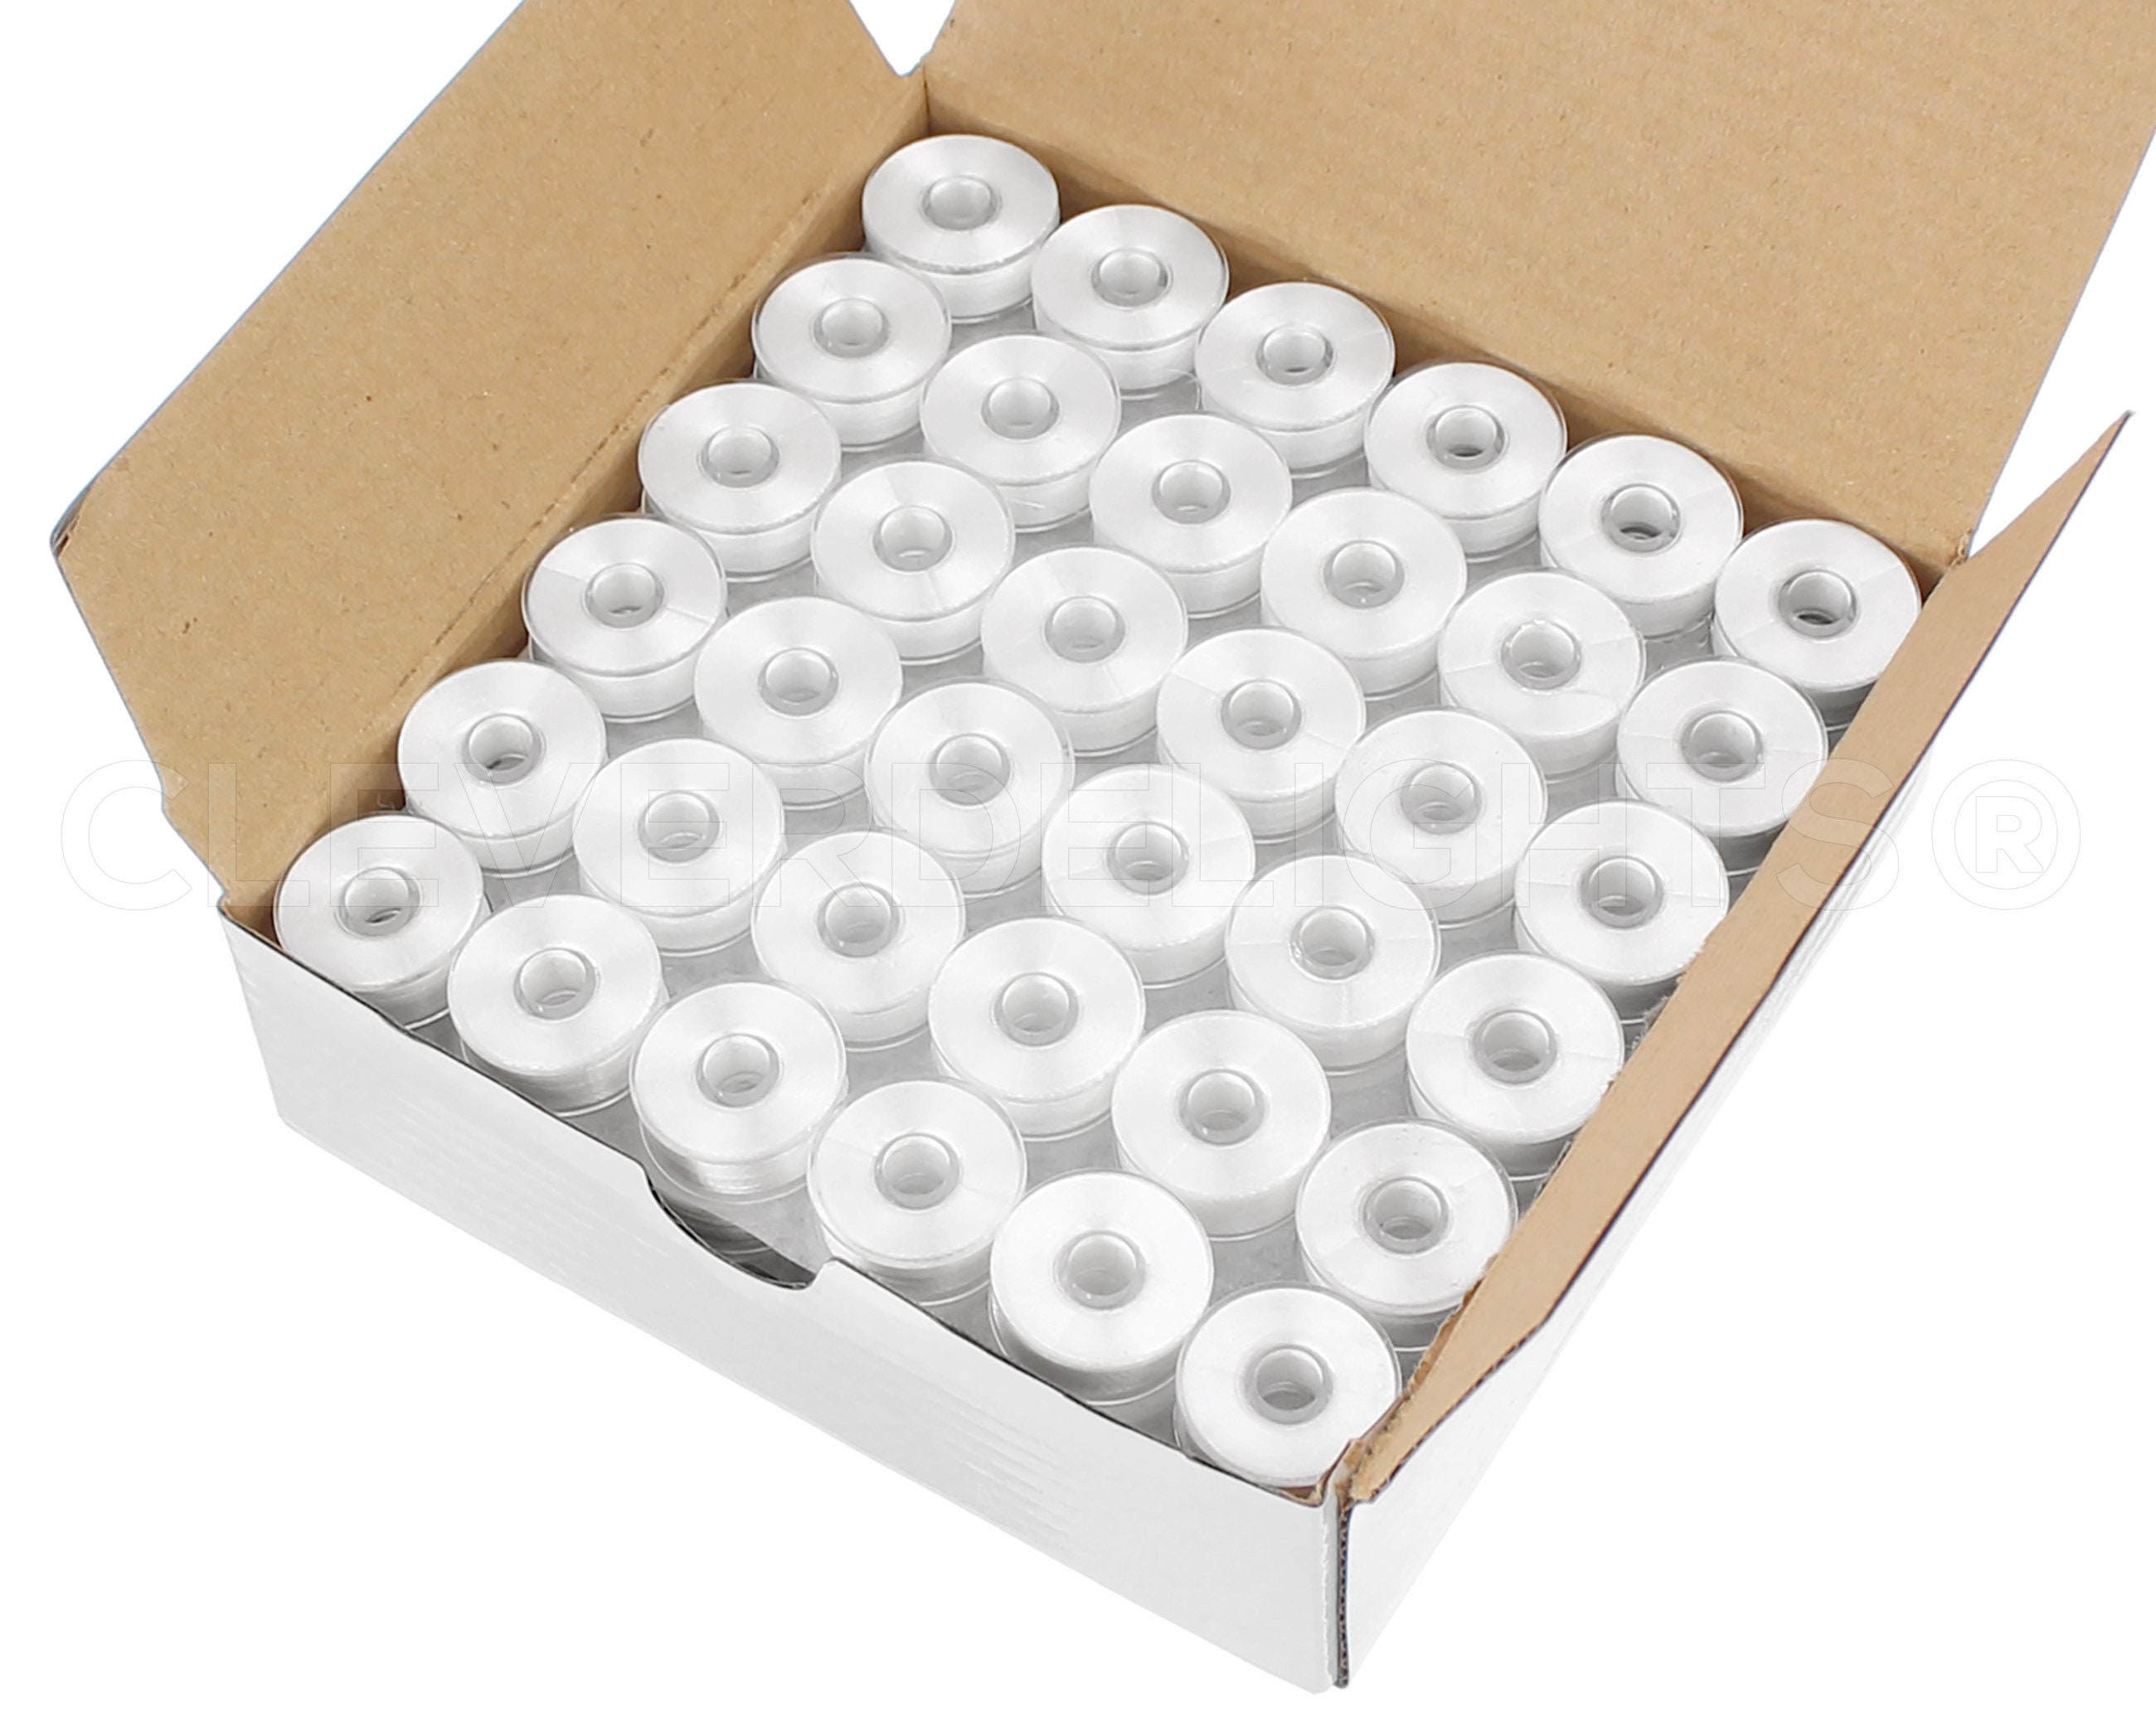 Threadart Prewound Embroidery Bobbins - 144 Count Per Box - White Cardboard  Sided - L Style - 6 Options Available